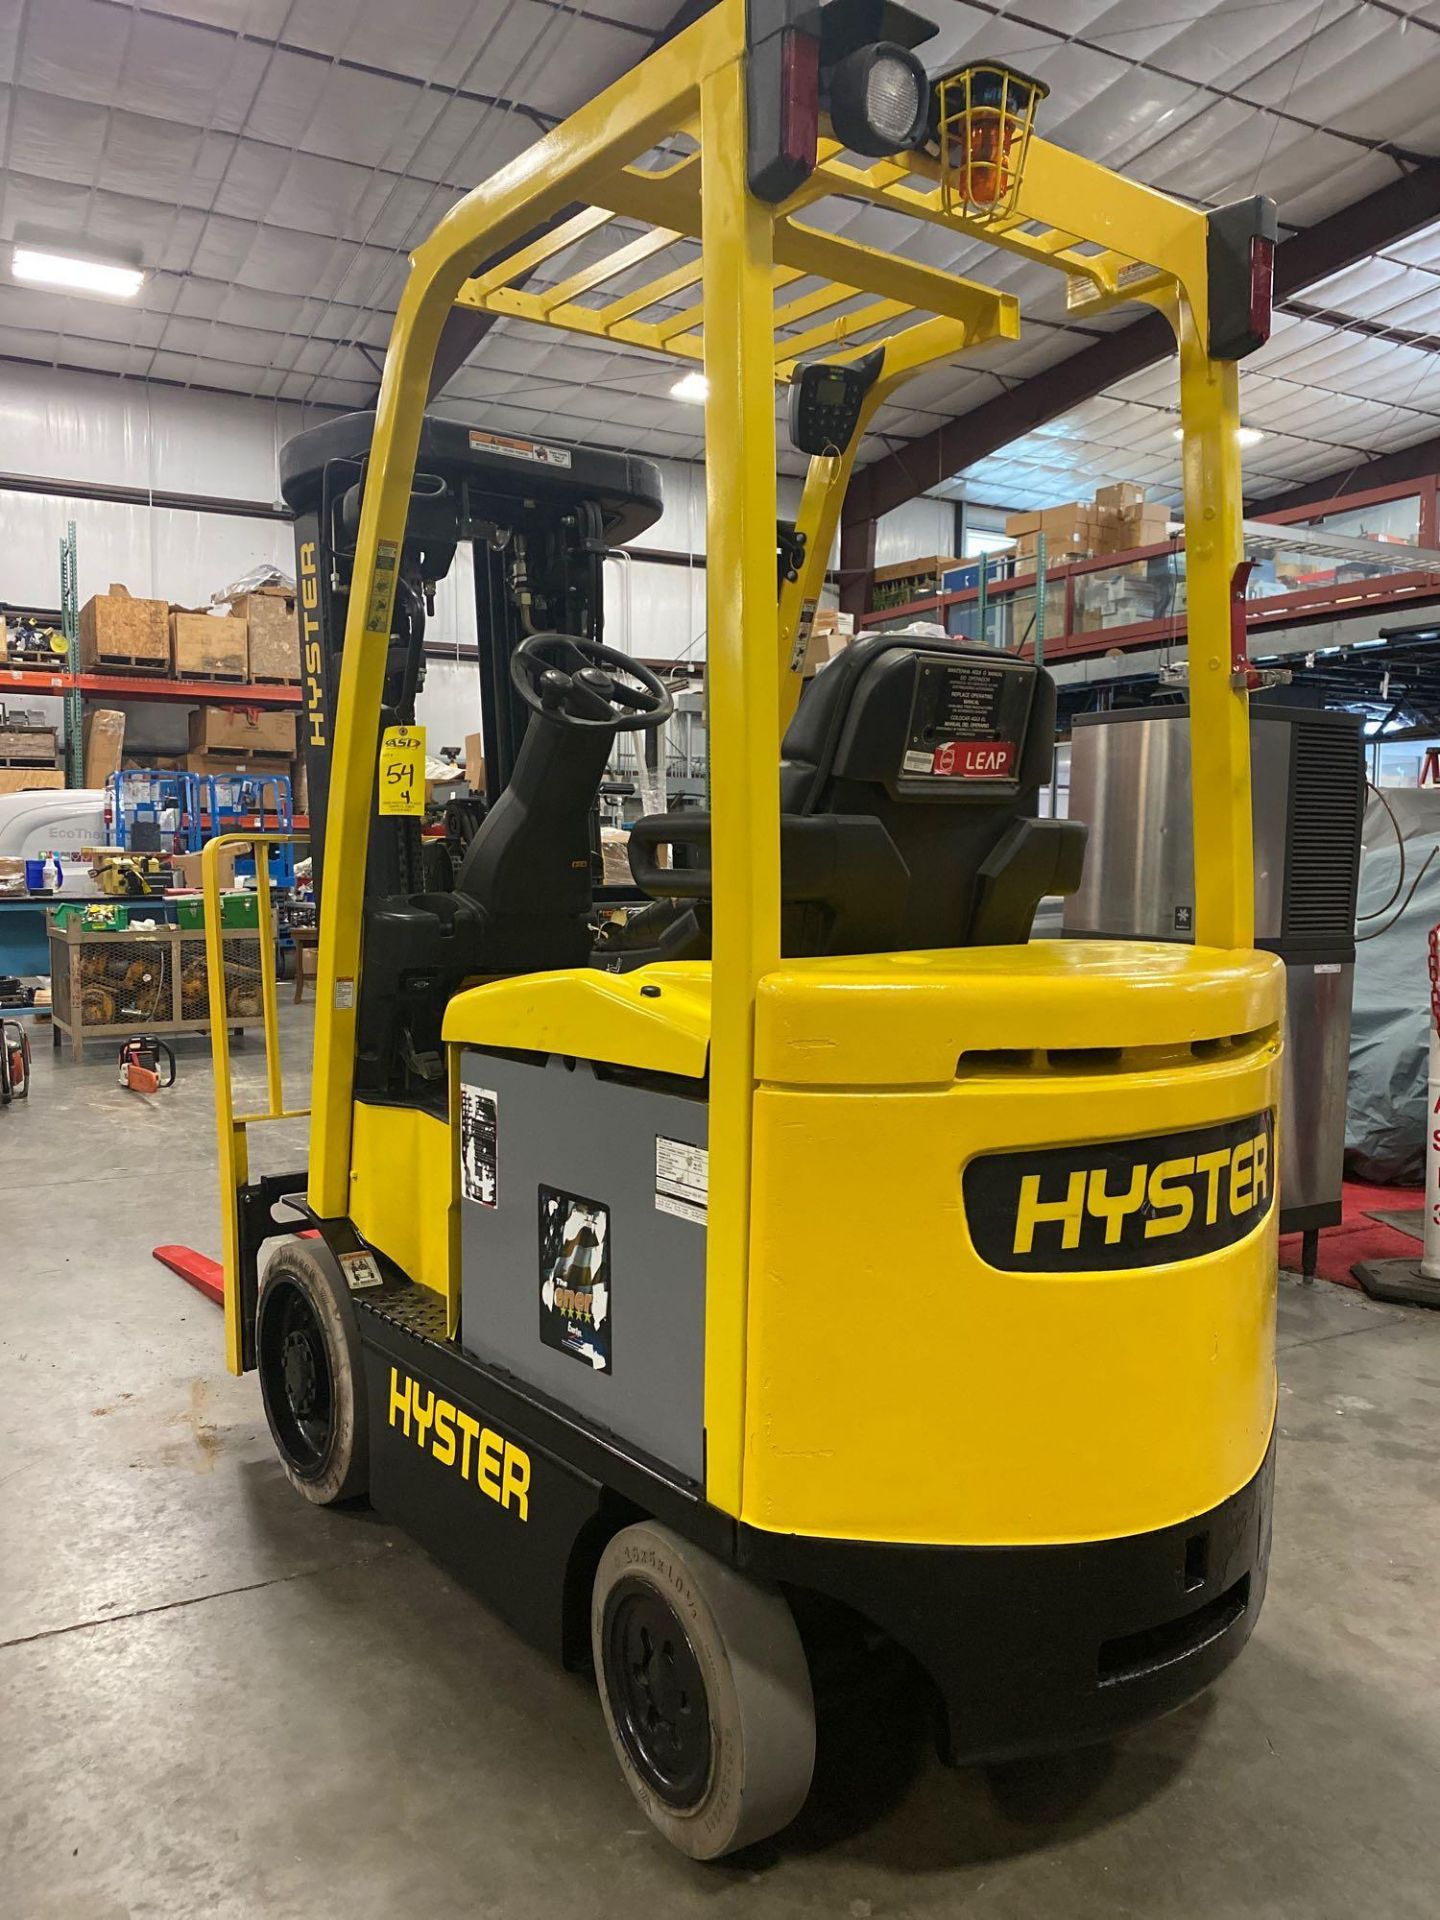 2011 HYSTER E50XN-27 ELECTRIC FORKLIFT, APPROX 5,000 LB CAPACITY, 240.2" HEIGHT CAPACITY, TILT, SIDE - Image 6 of 9